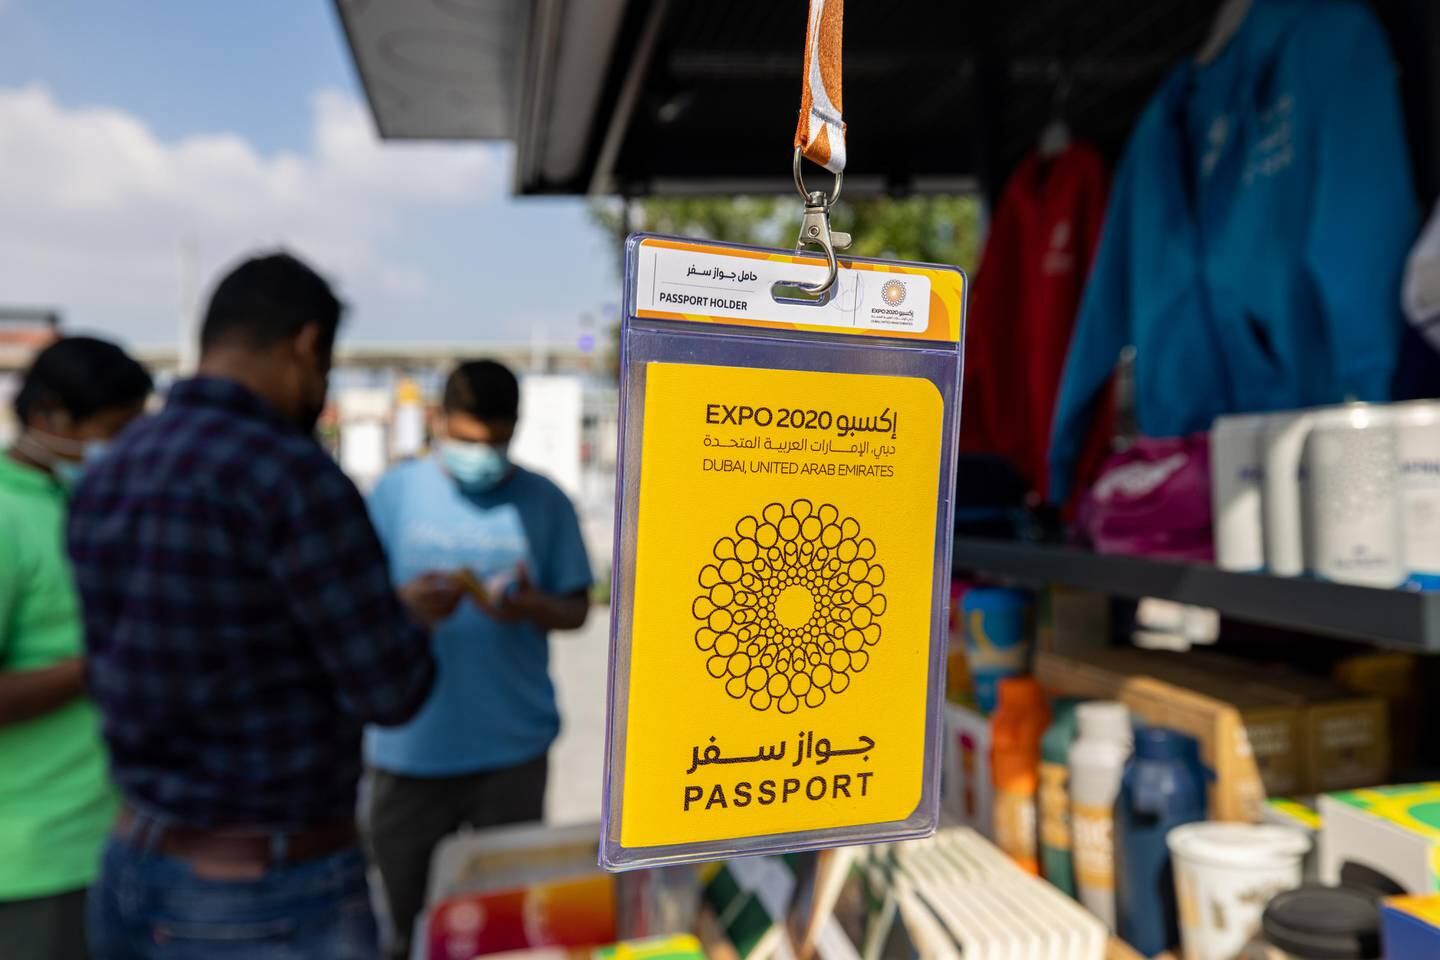 One million Expo 2020 passports have been sold since October 1. Photo: Expo 2020 Dubai